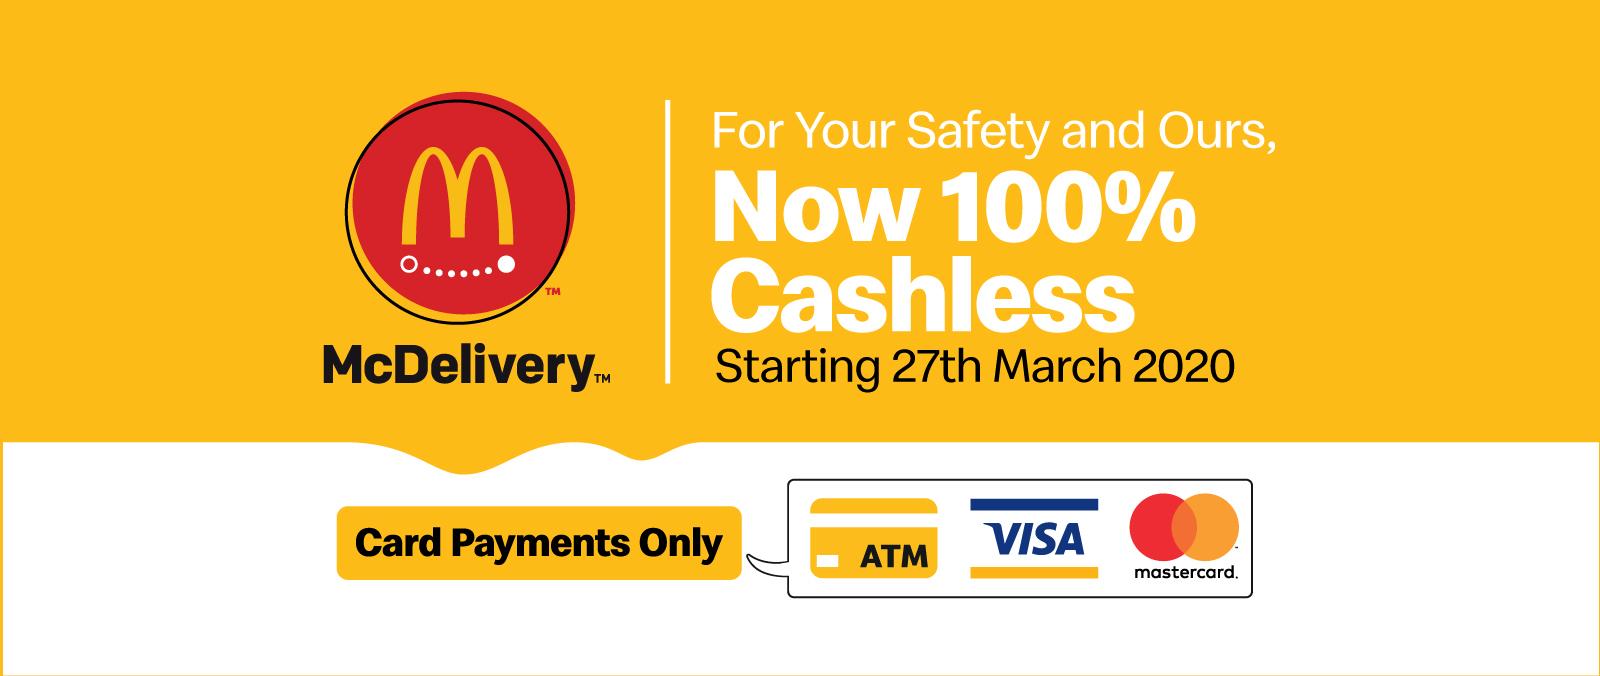 Cashless & Contactless McDelivery's image'